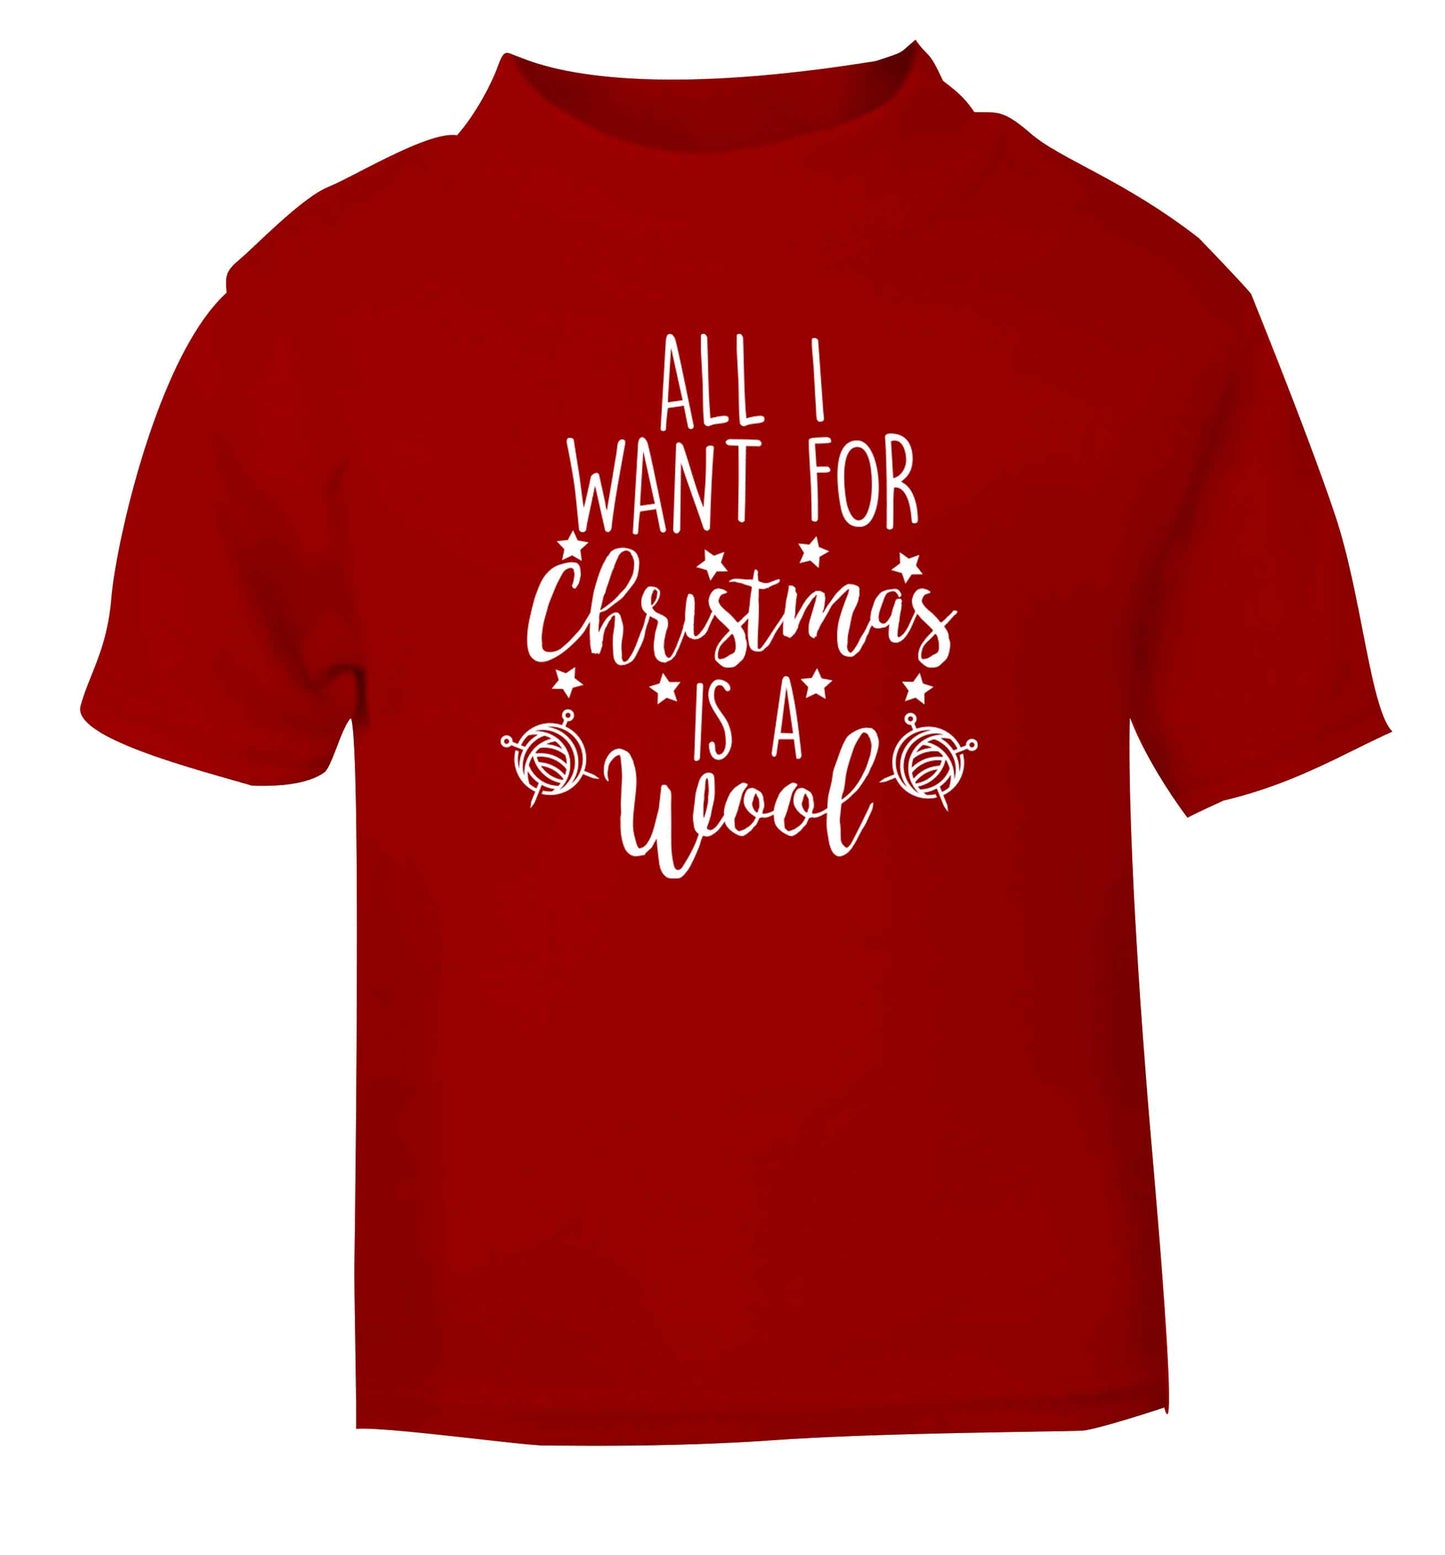 All I want for Christmas is wool! red Baby Toddler Tshirt 2 Years